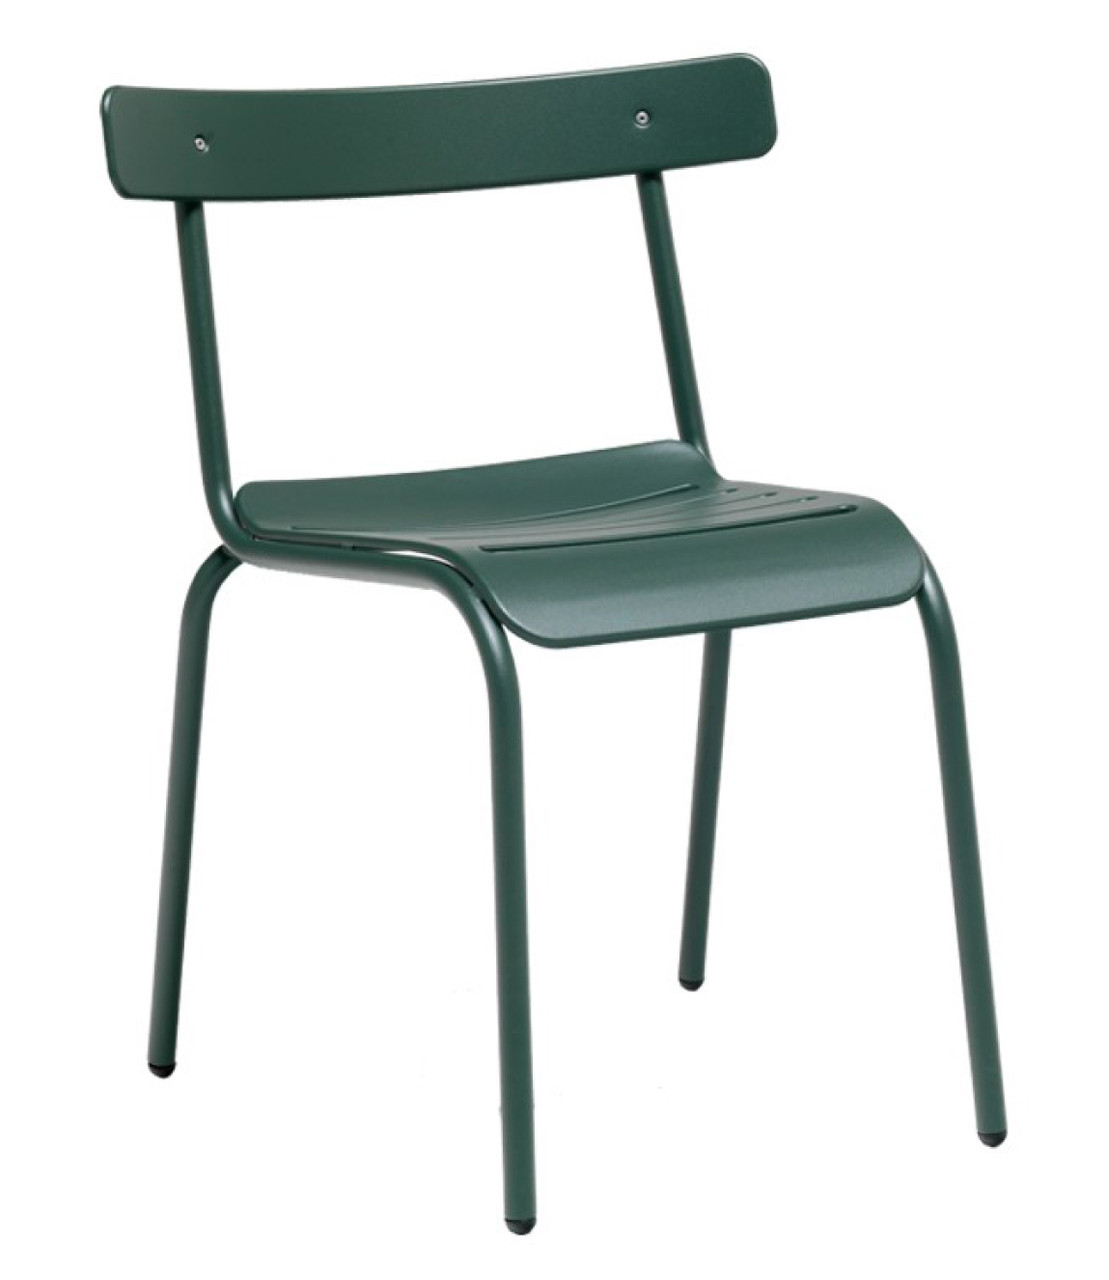 Miky Side Chair - Iron Finish - Regal Seating Co.